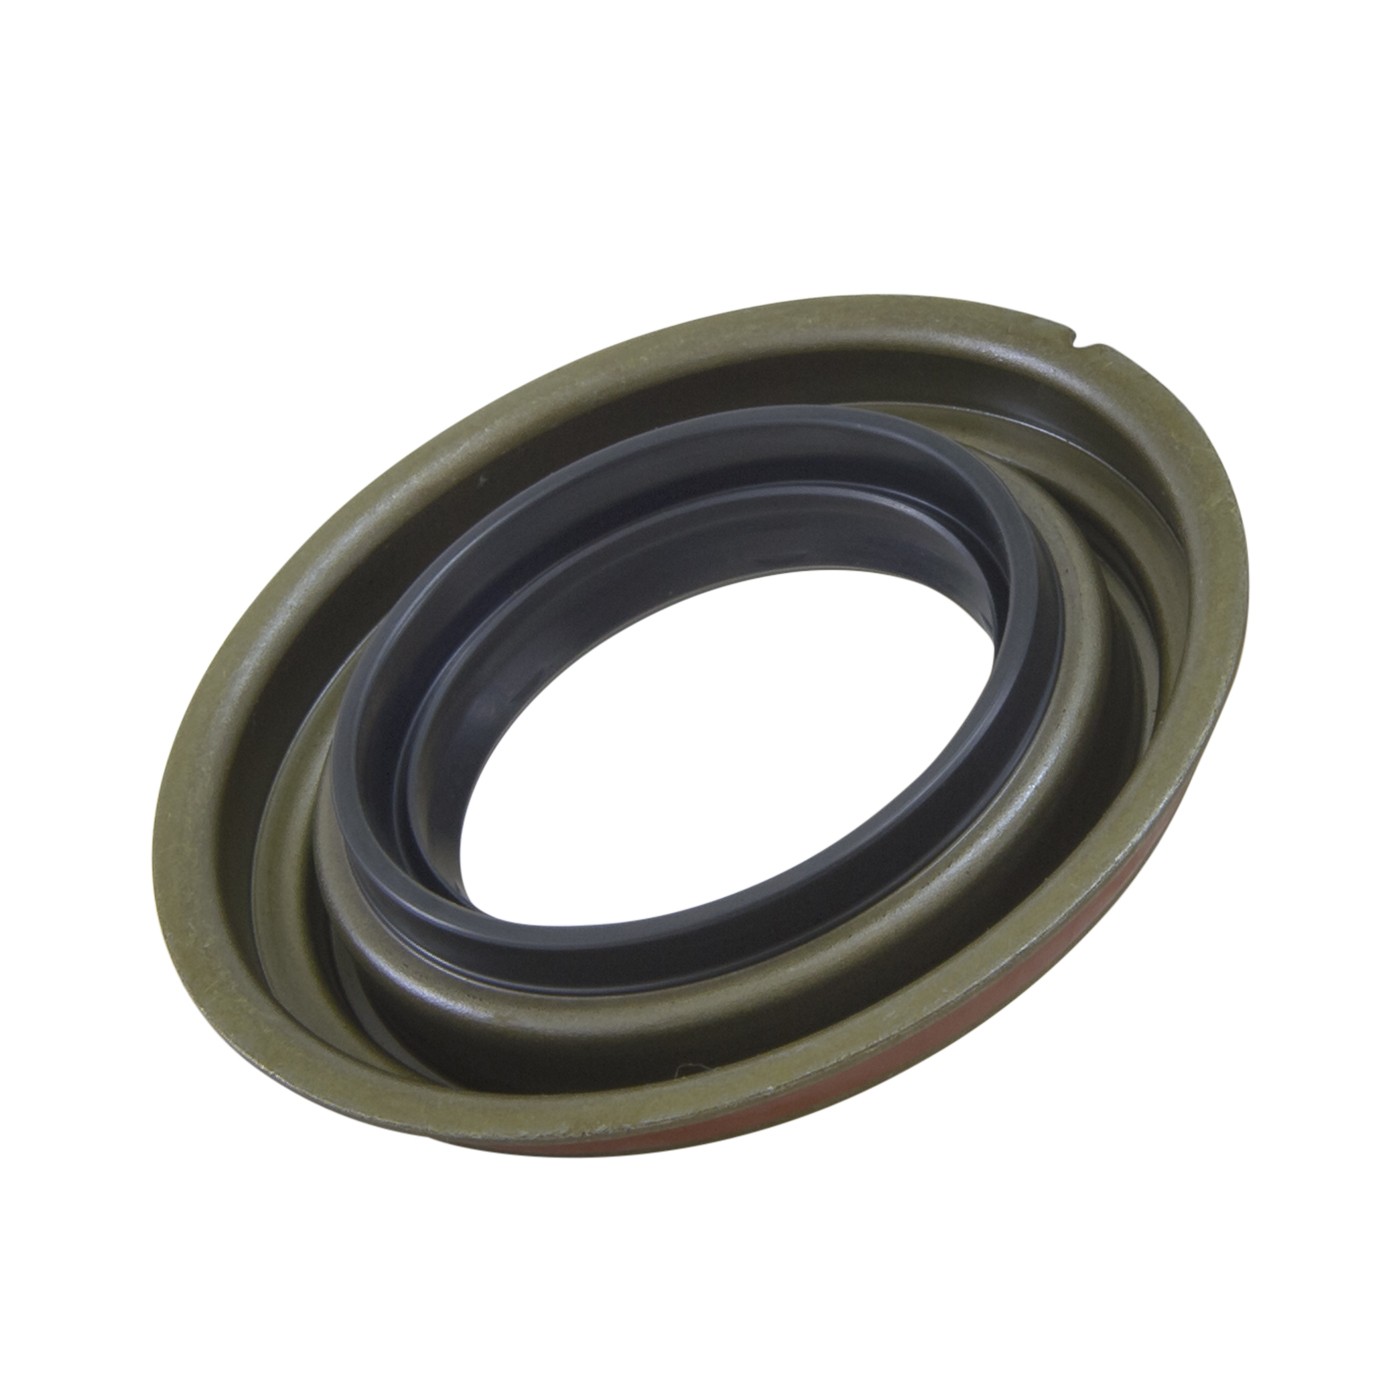 Rear wheel seal for 2011 & up GM 11.5" rear 